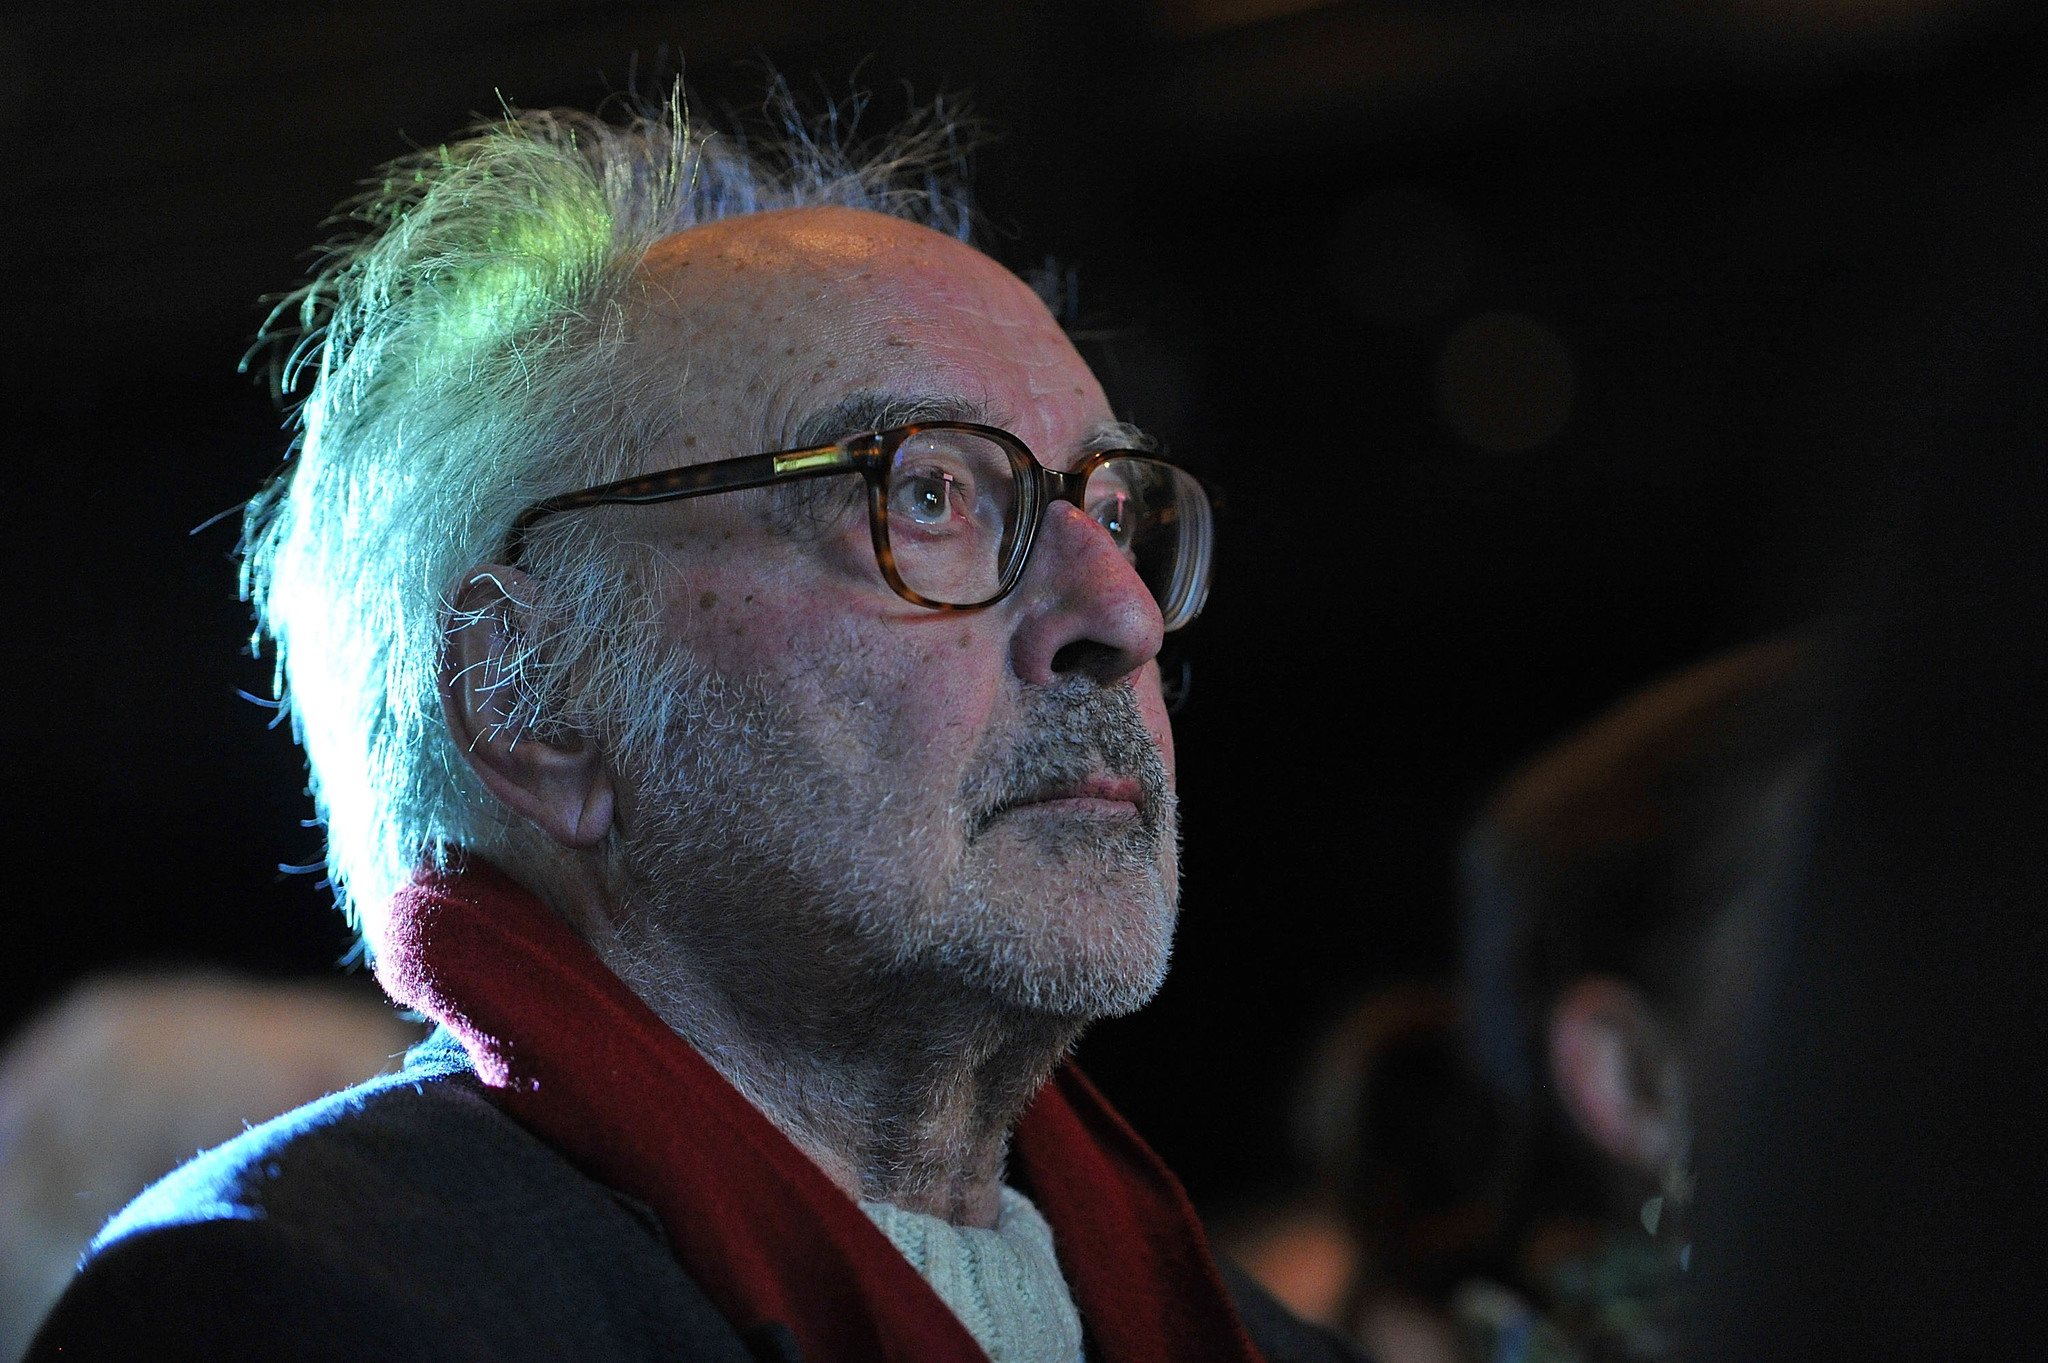 ZURICH, SWITZERLAND - NOVEMBER 30:  Director Jean-Luc Godard looks on befroe receiving the Swiss Federal Design Award Grand Prix held at X-Tra on November 30, 2010 in Zurich, Switzerland. Jean-Luc Godard, who will be celebrating his 80th birthday on Friday, claimed he will spend the money of the prize to pay his Swiss tax he never had to pay the 35 previous years he lived in Switzerland.  (Photo by The Image Gate/Getty Images)